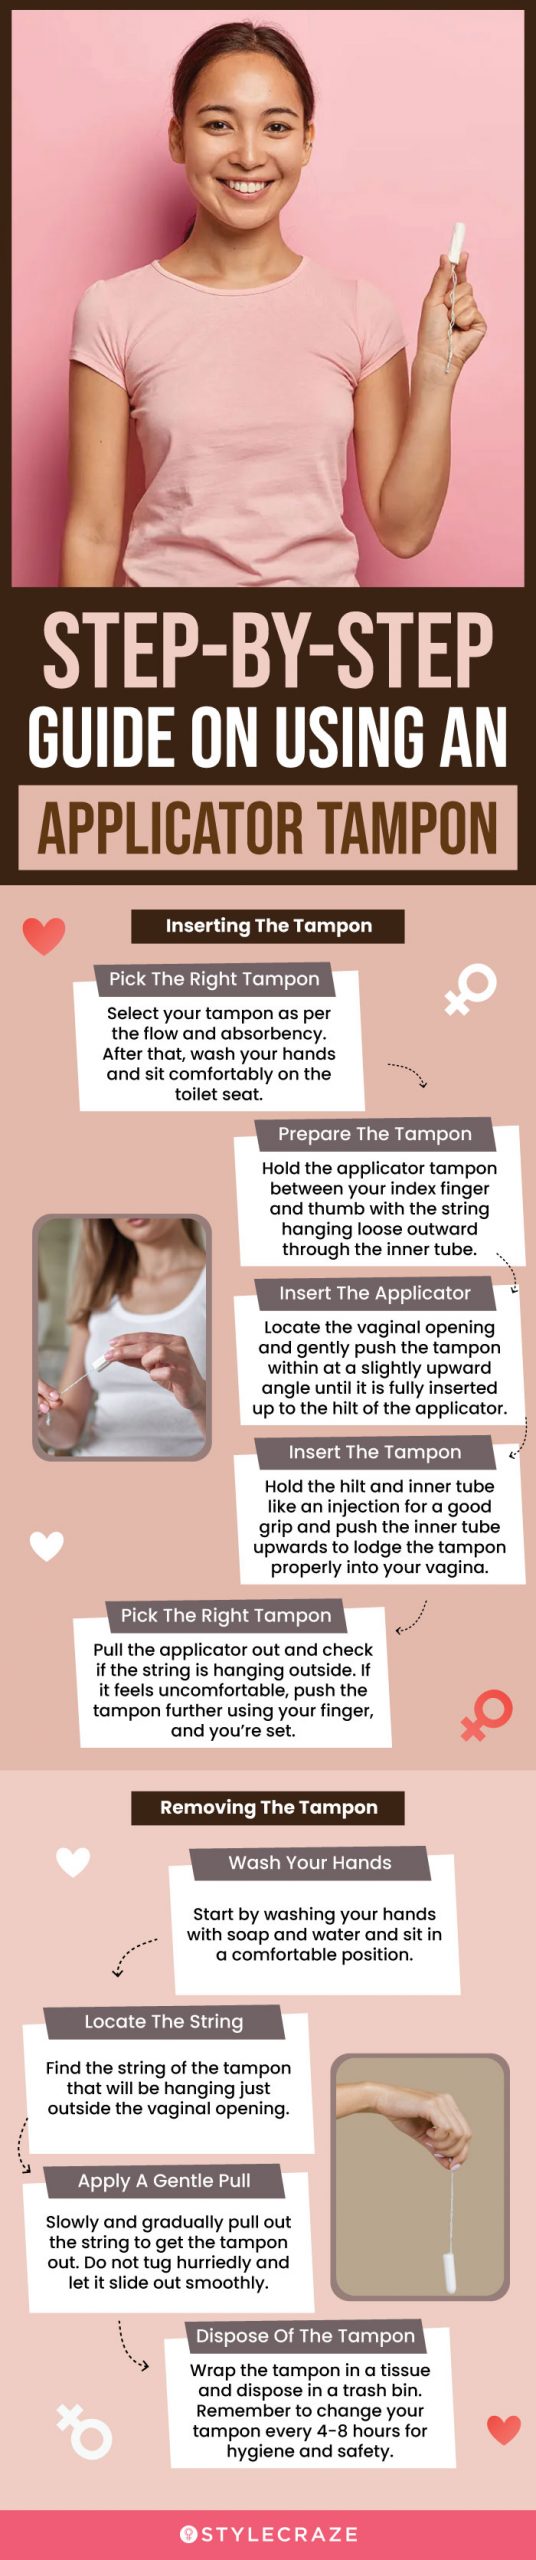 Step-by-Step Guide On Using An Applicator Tampon (infographic)